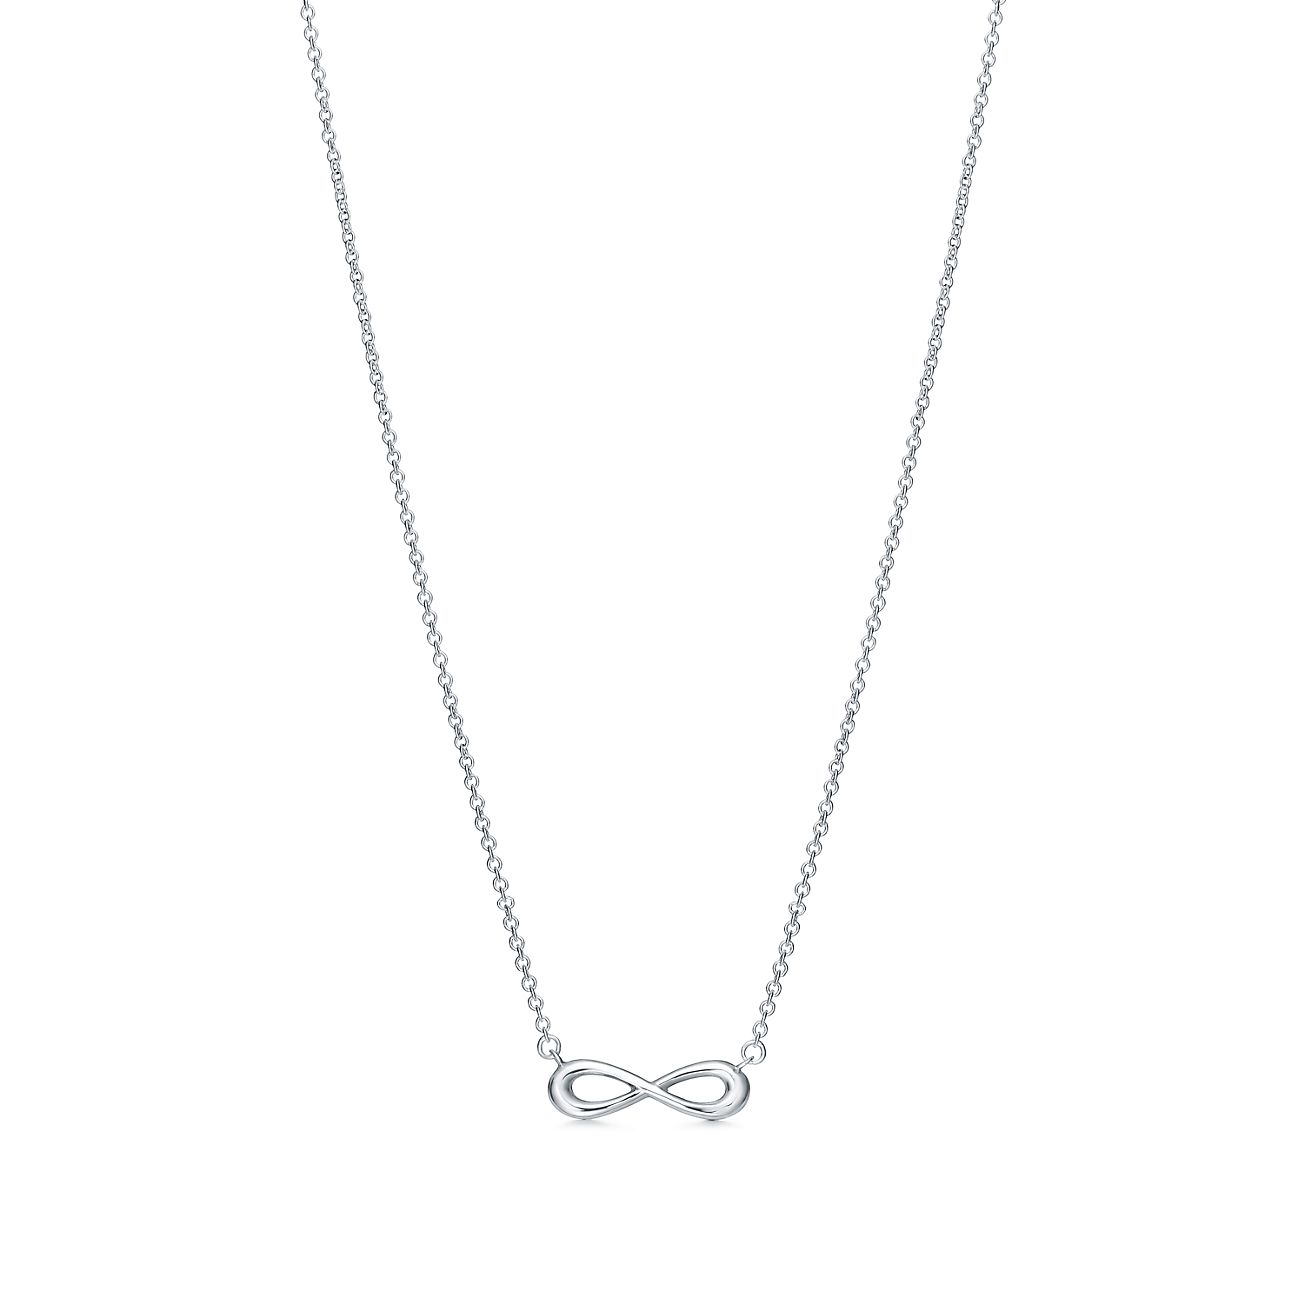 Tiffany Infinity Necklace Meaning